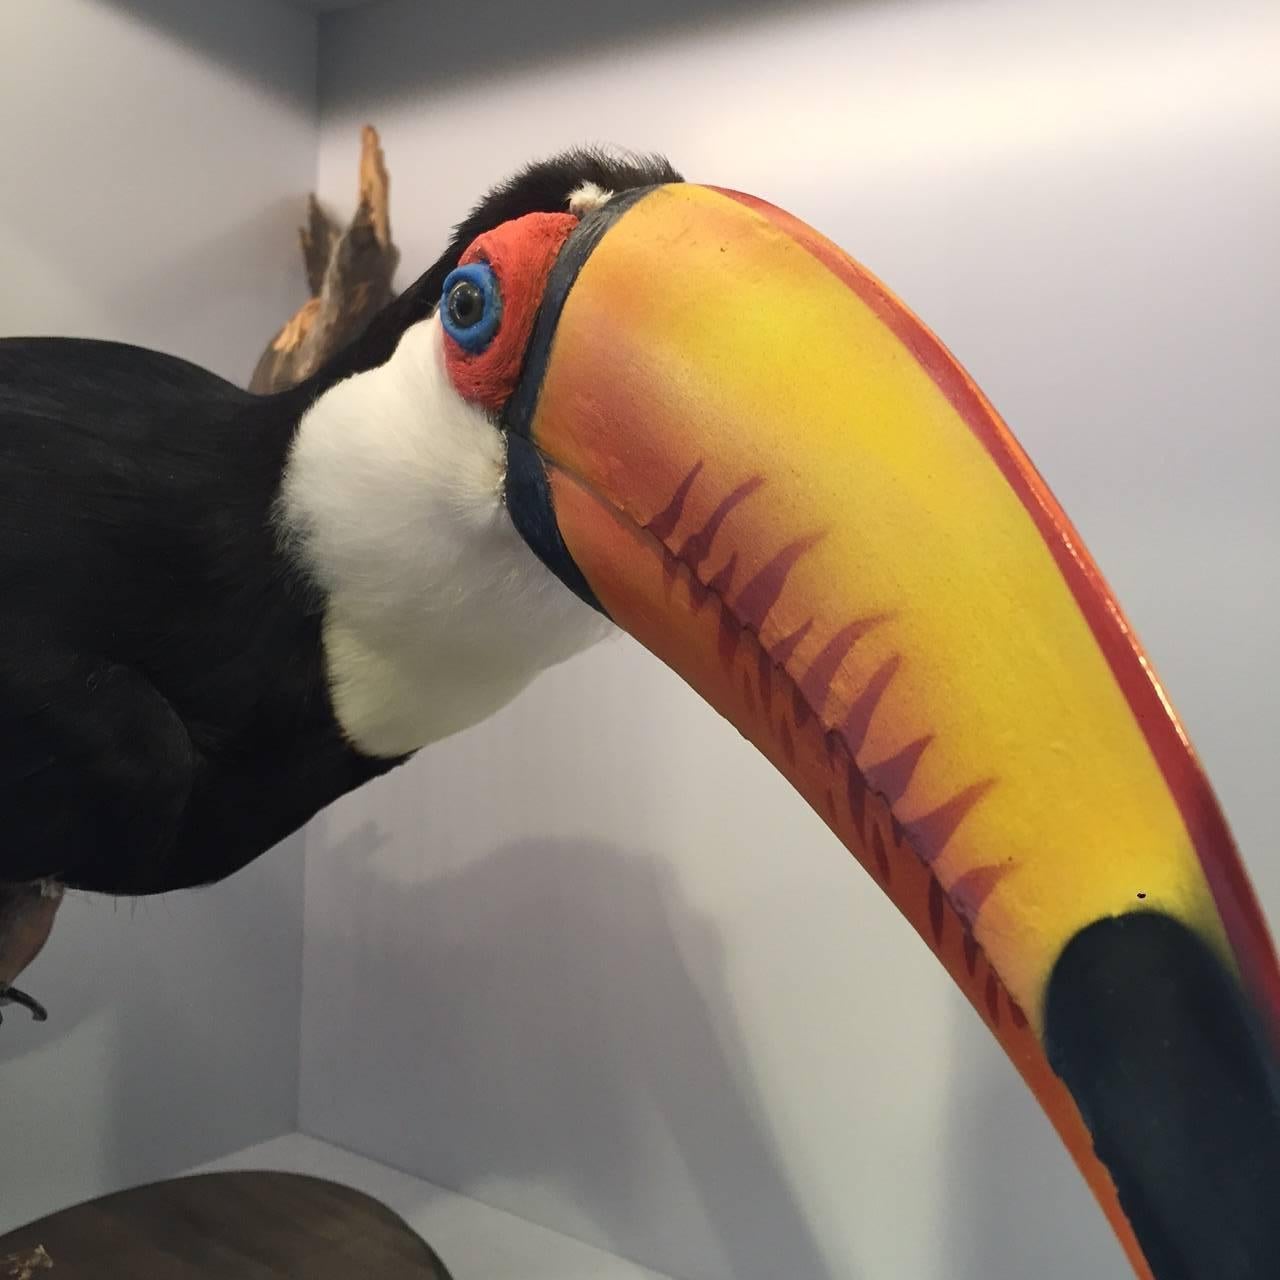 Beautifully mounted taxidermy Toco Toucan bird. This species is the largest and most common of the Toucans. It is mostly found in semi-open habitats throughout a large part of central and South America.